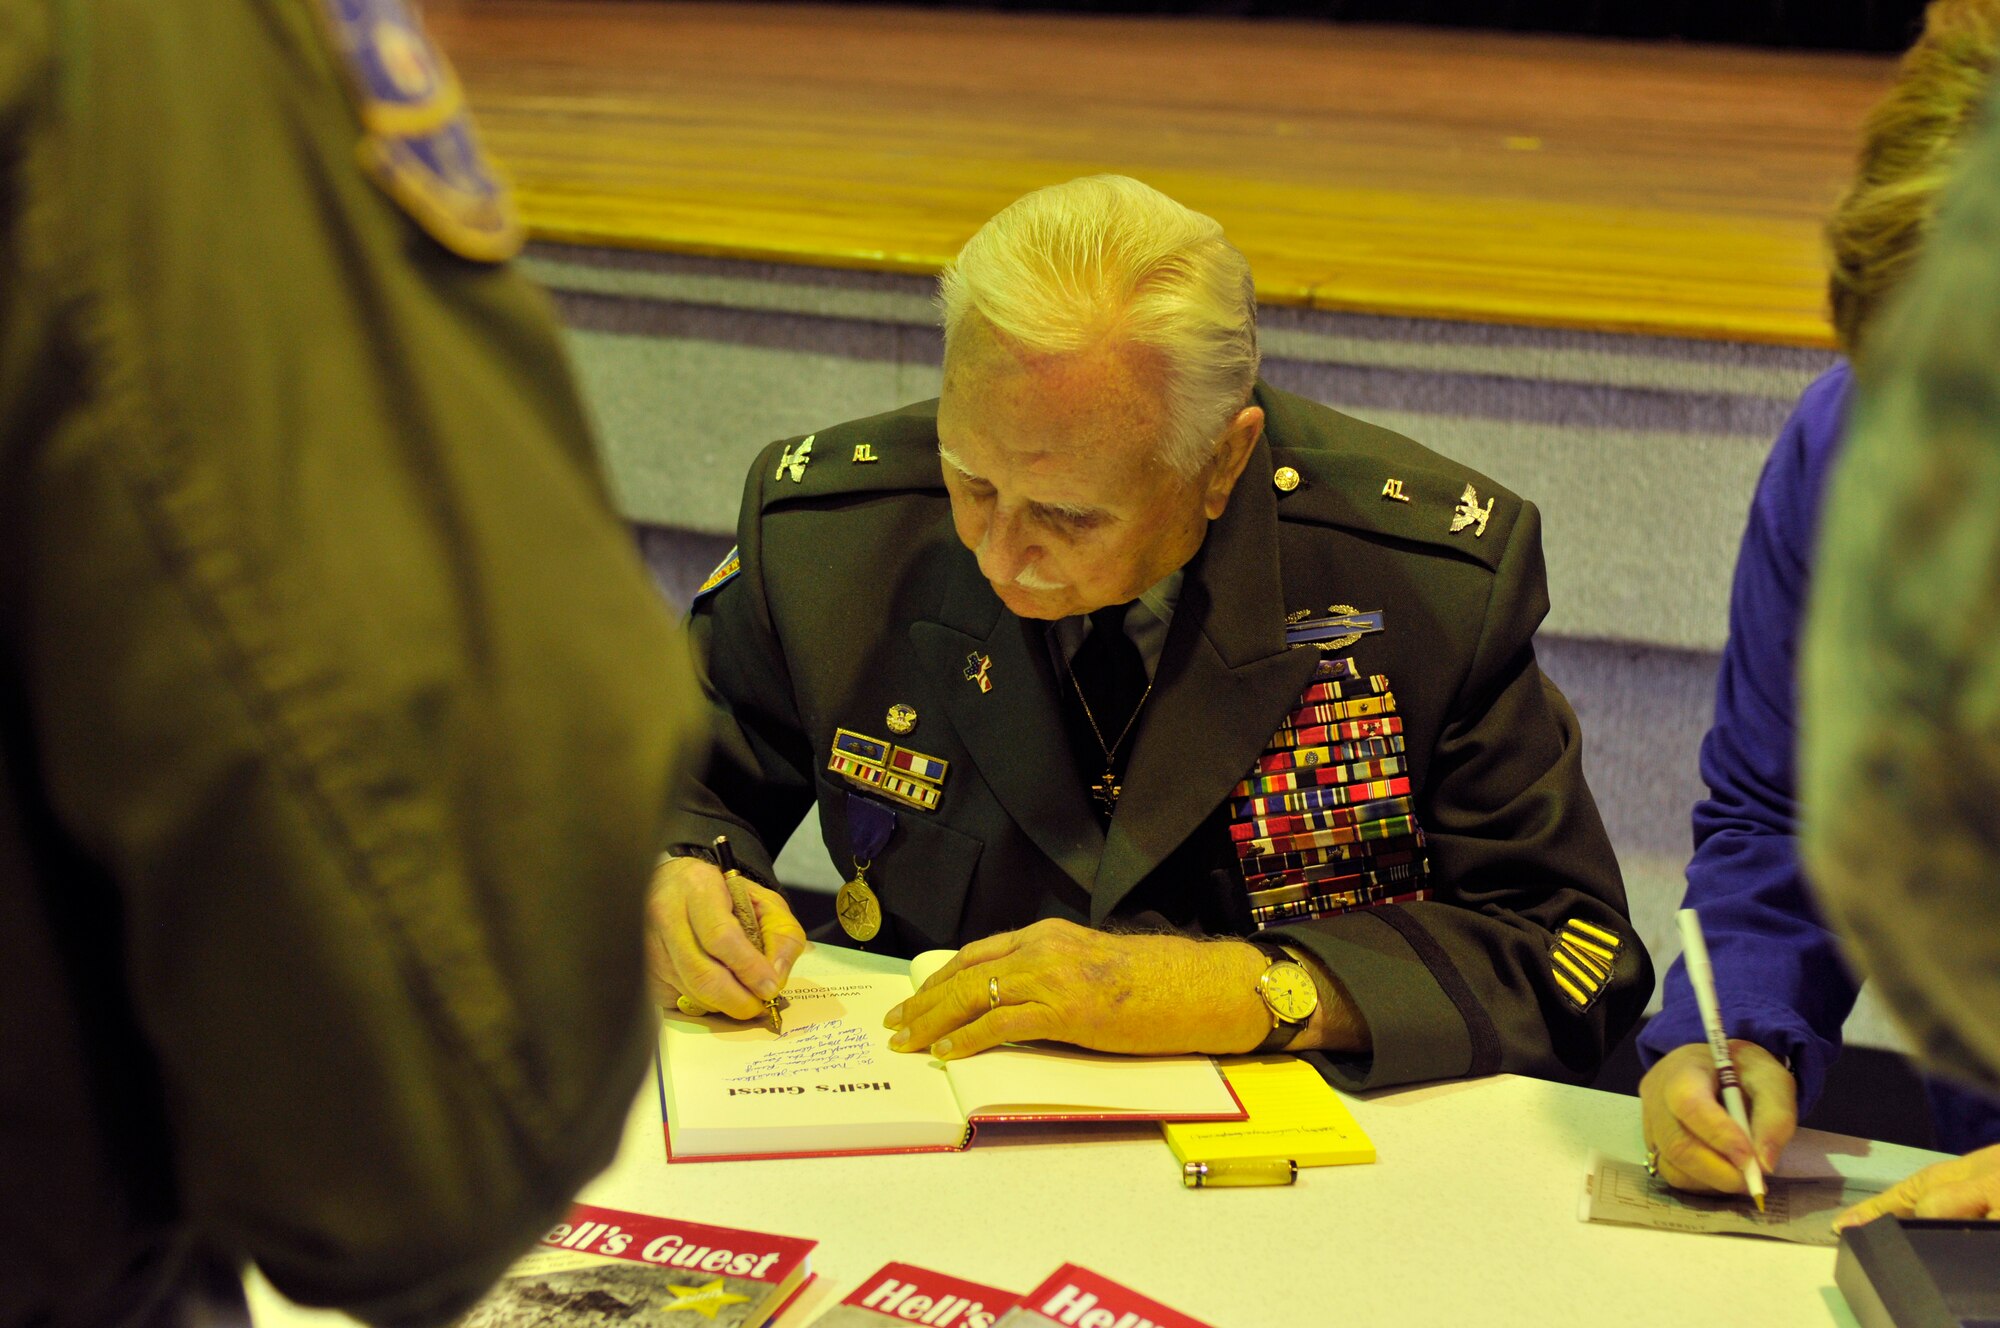 PATRICK AIR FORCE BASE, Fla. ? Colonel Glenn Frazier, recipient of the Medal of Freedom, the Bronze Star, four Purple Hearts and many, many more awards and recognitions than most, signs his book, ?Hell?s Guest,? for awaiting Reserve Airmen. Colonel Frazier was invited to speak at the 920th Rescue Wing here about his grueling experiences as a Prisoner of War during the Bataan Death March at the start of World War II.  Details of the march were lived by men like Colonel Frazier. The men were surrounded by death; beheading, throat-cutting and shooting were common causes of death but deliberate starvation, dehydration, stabbing with bayonet and rifle-butt beatings were also prevalent during the week-long continual march. The 60 mile trek would be like walking from here to Orlando, Fla., in the middle of sweltering August. (U.S. Air Force photo/Staff Sgt. Leslie Kraushaar)